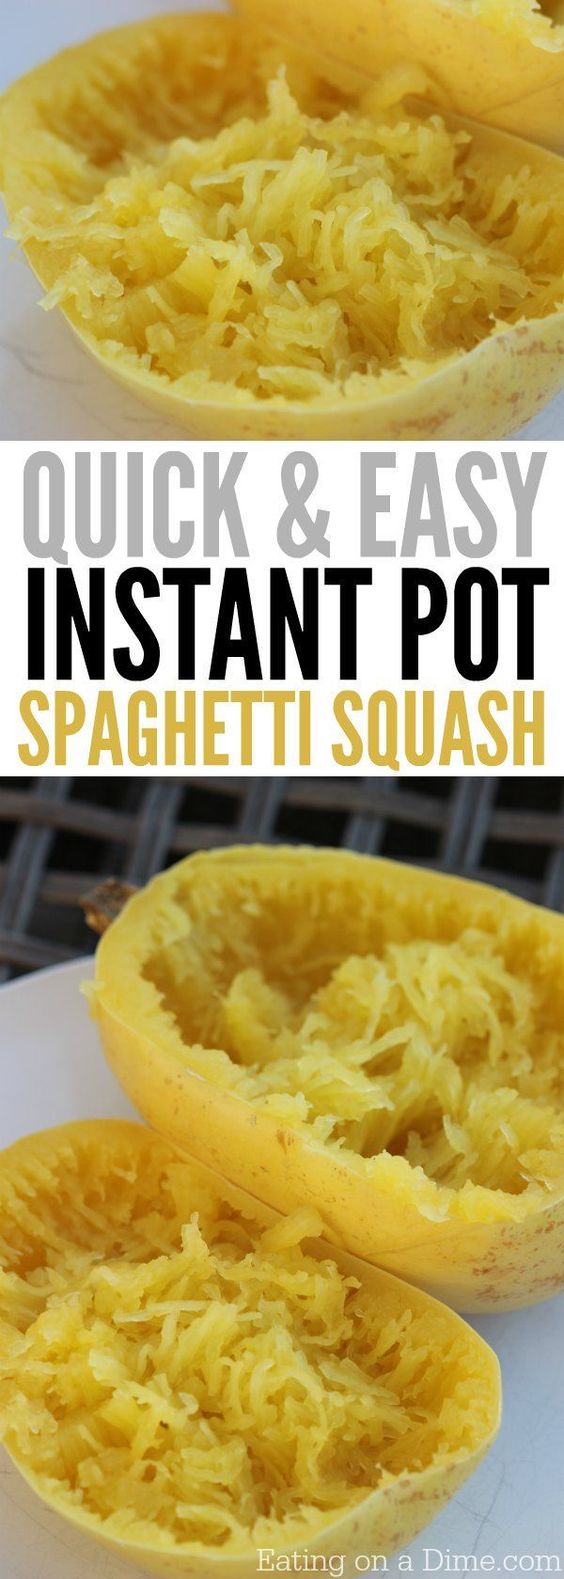 QUICK AND EASY INSTANT POT SPAGHETTI SQUASH RECIPE - Lusciousfoodie